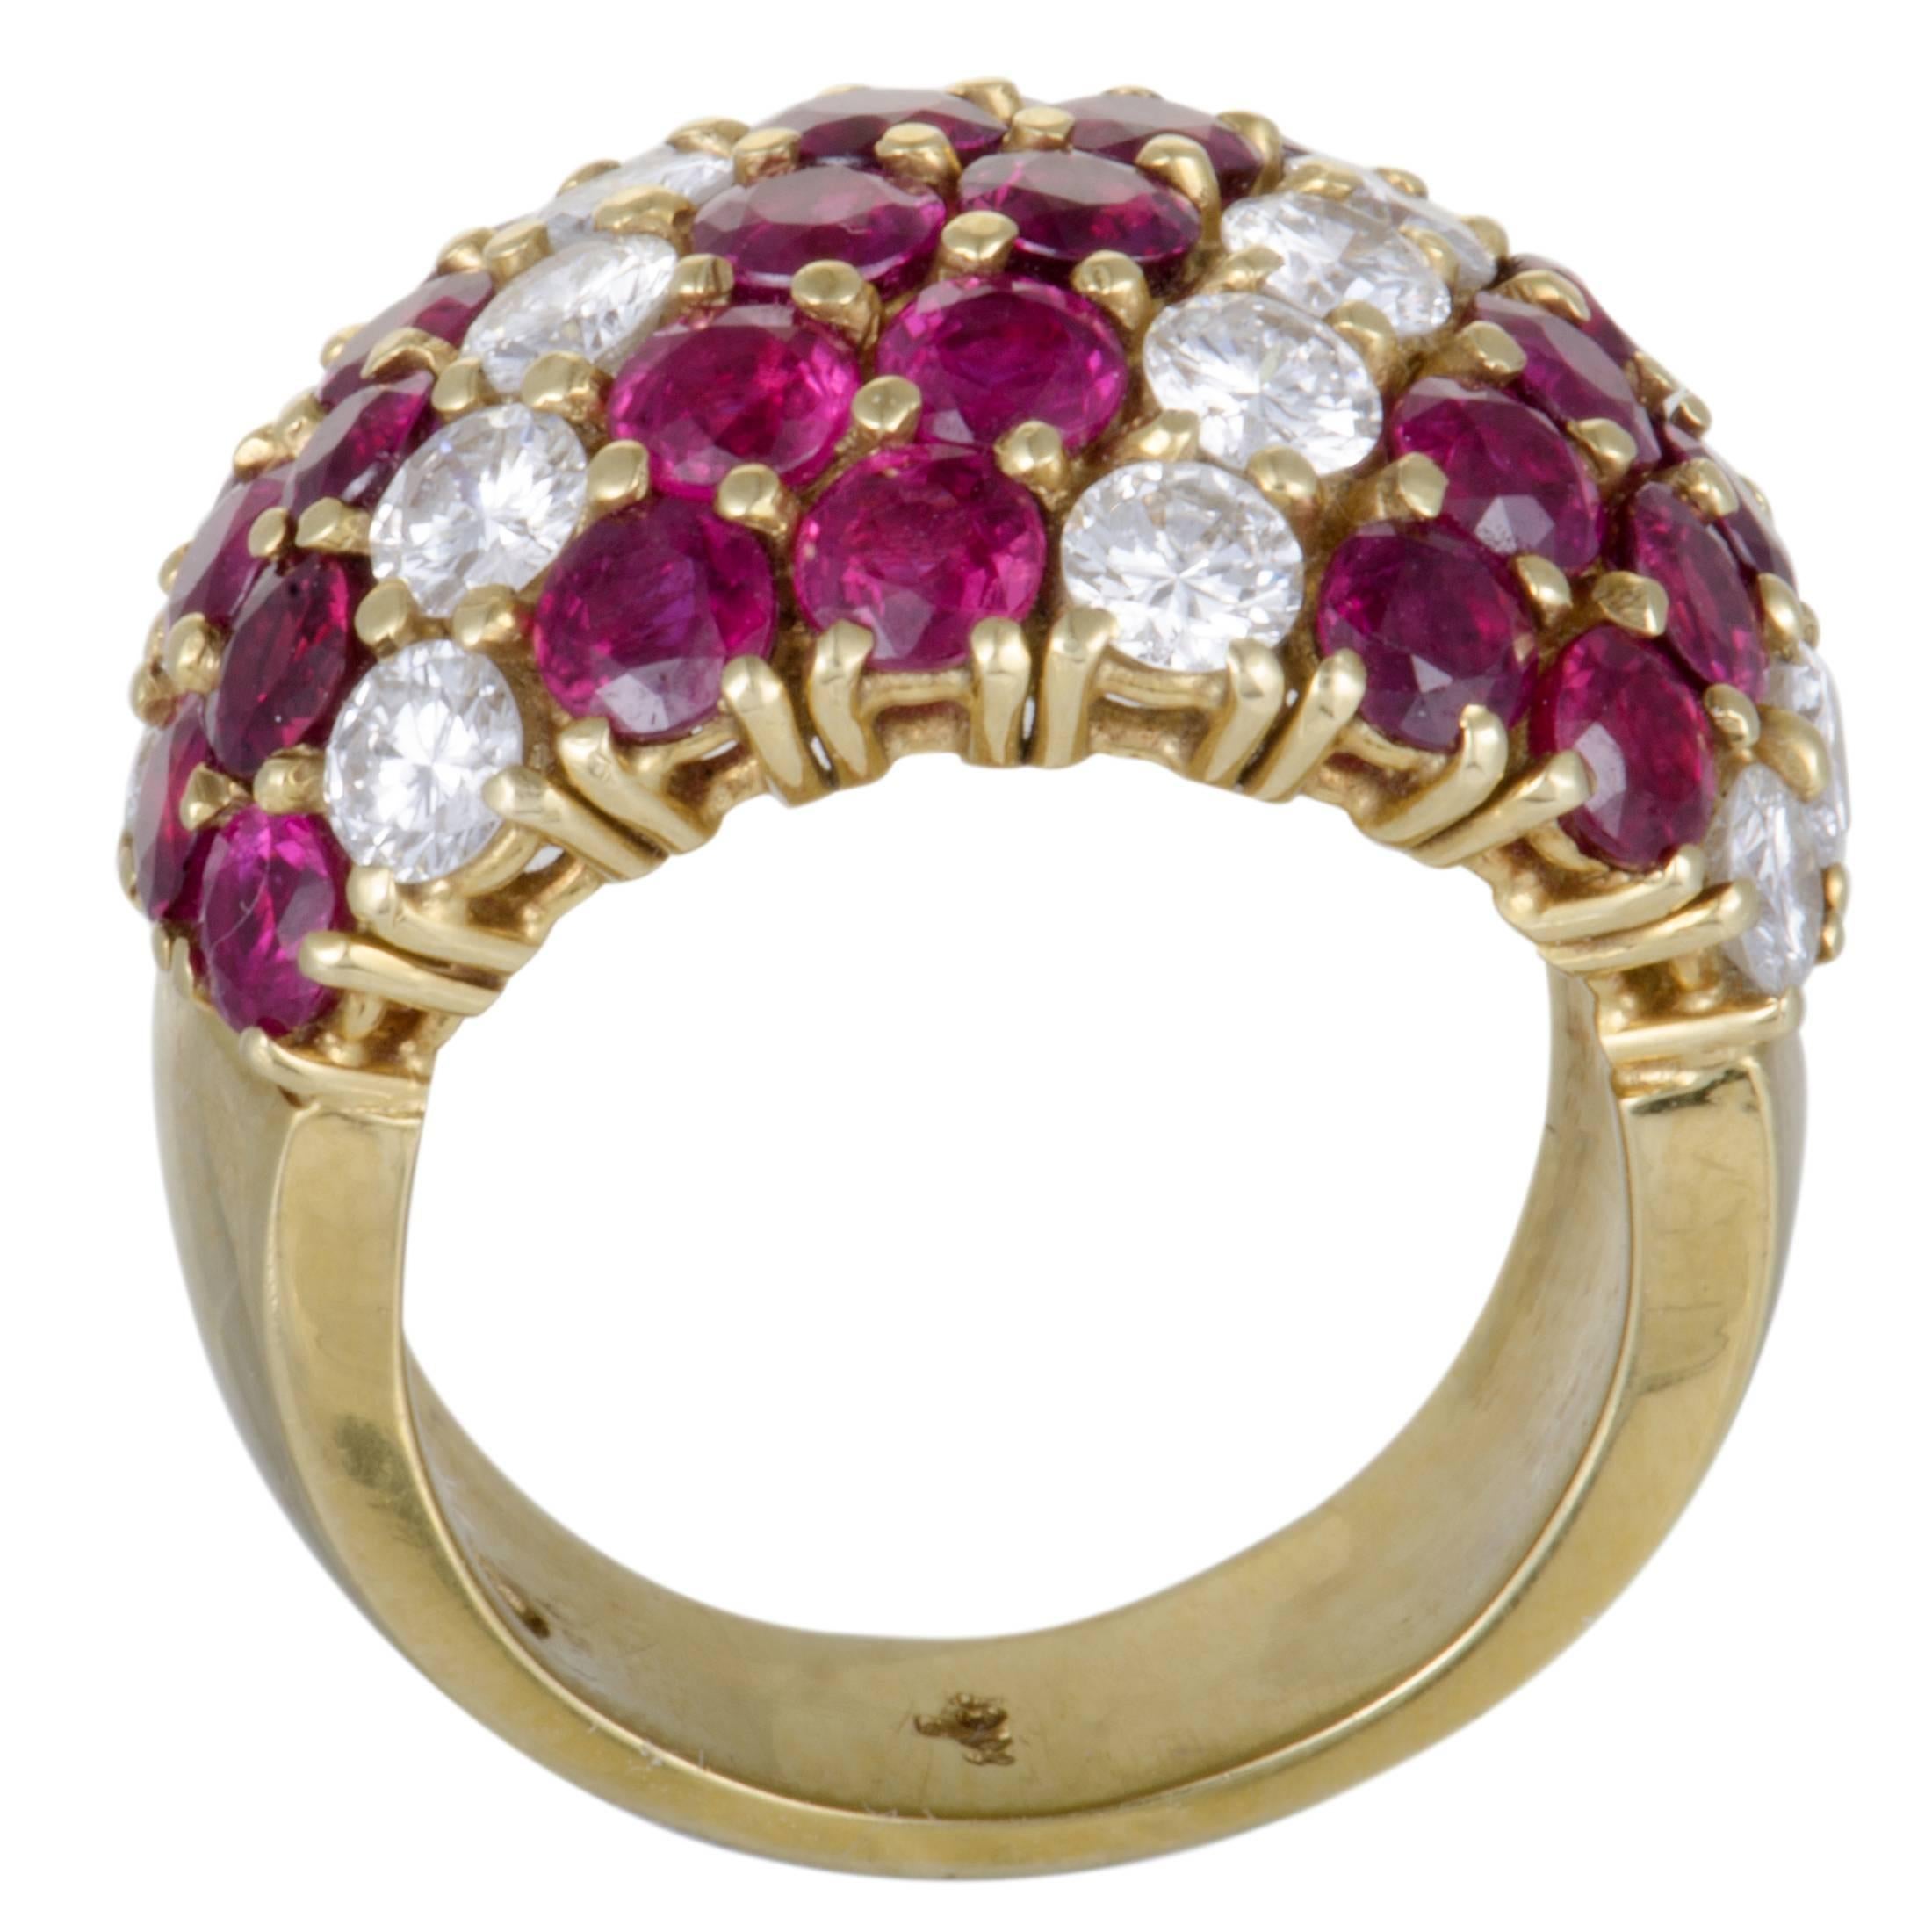 This breathtaking ring is beautifully designed by Adler in shimmering 18K yellow gold. The sensational ring displays an exquisitely charming appeal with its extravagant adornment of dazzling diamonds, weighing 2.90ct and captivating rubies, weighing